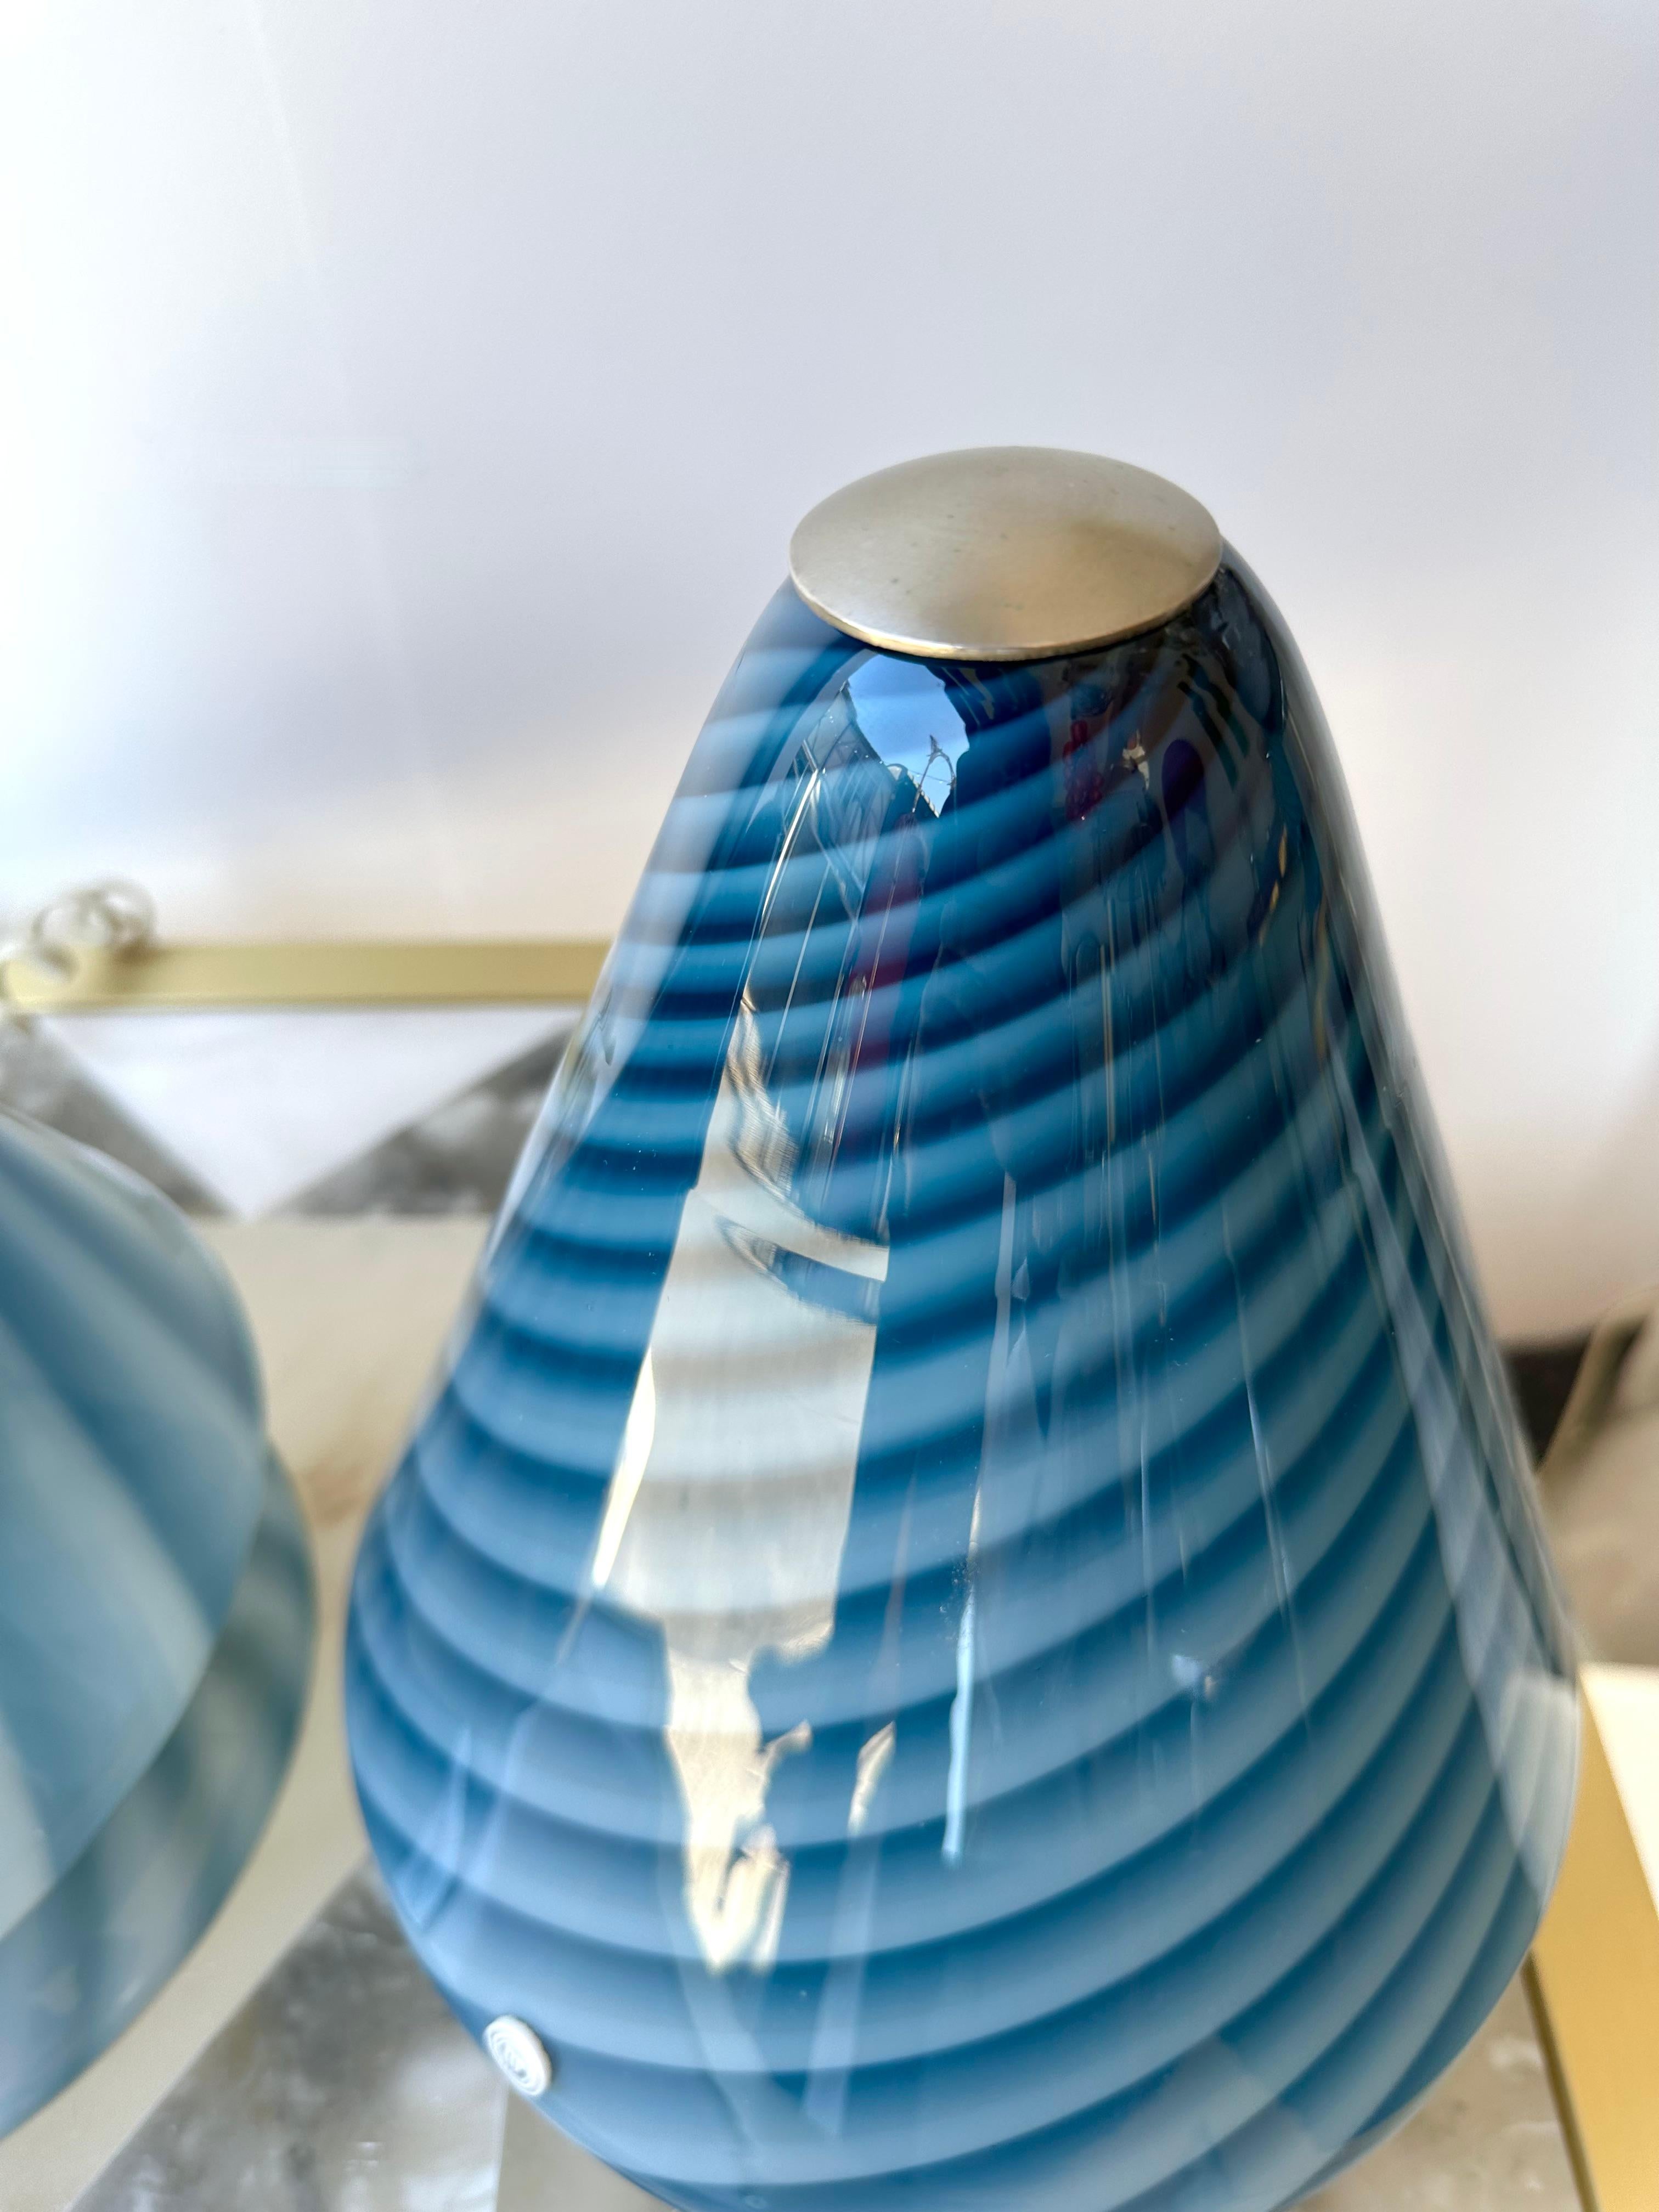 Pair of Blue Spiral Murano Glass Lamps by La Murrina, Italy, 1970s For Sale 5